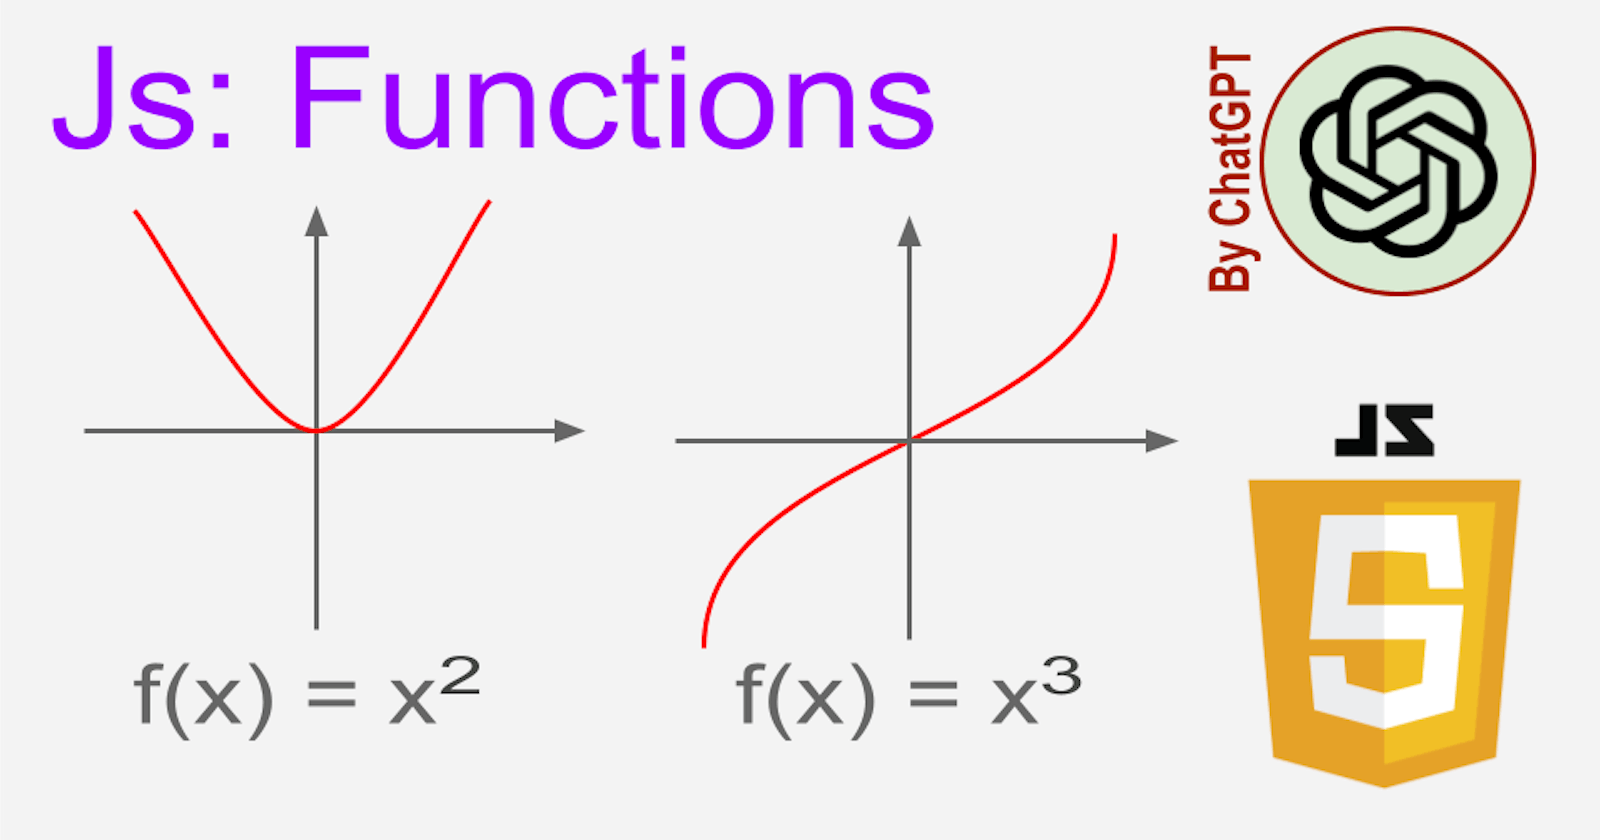 JS: Functions